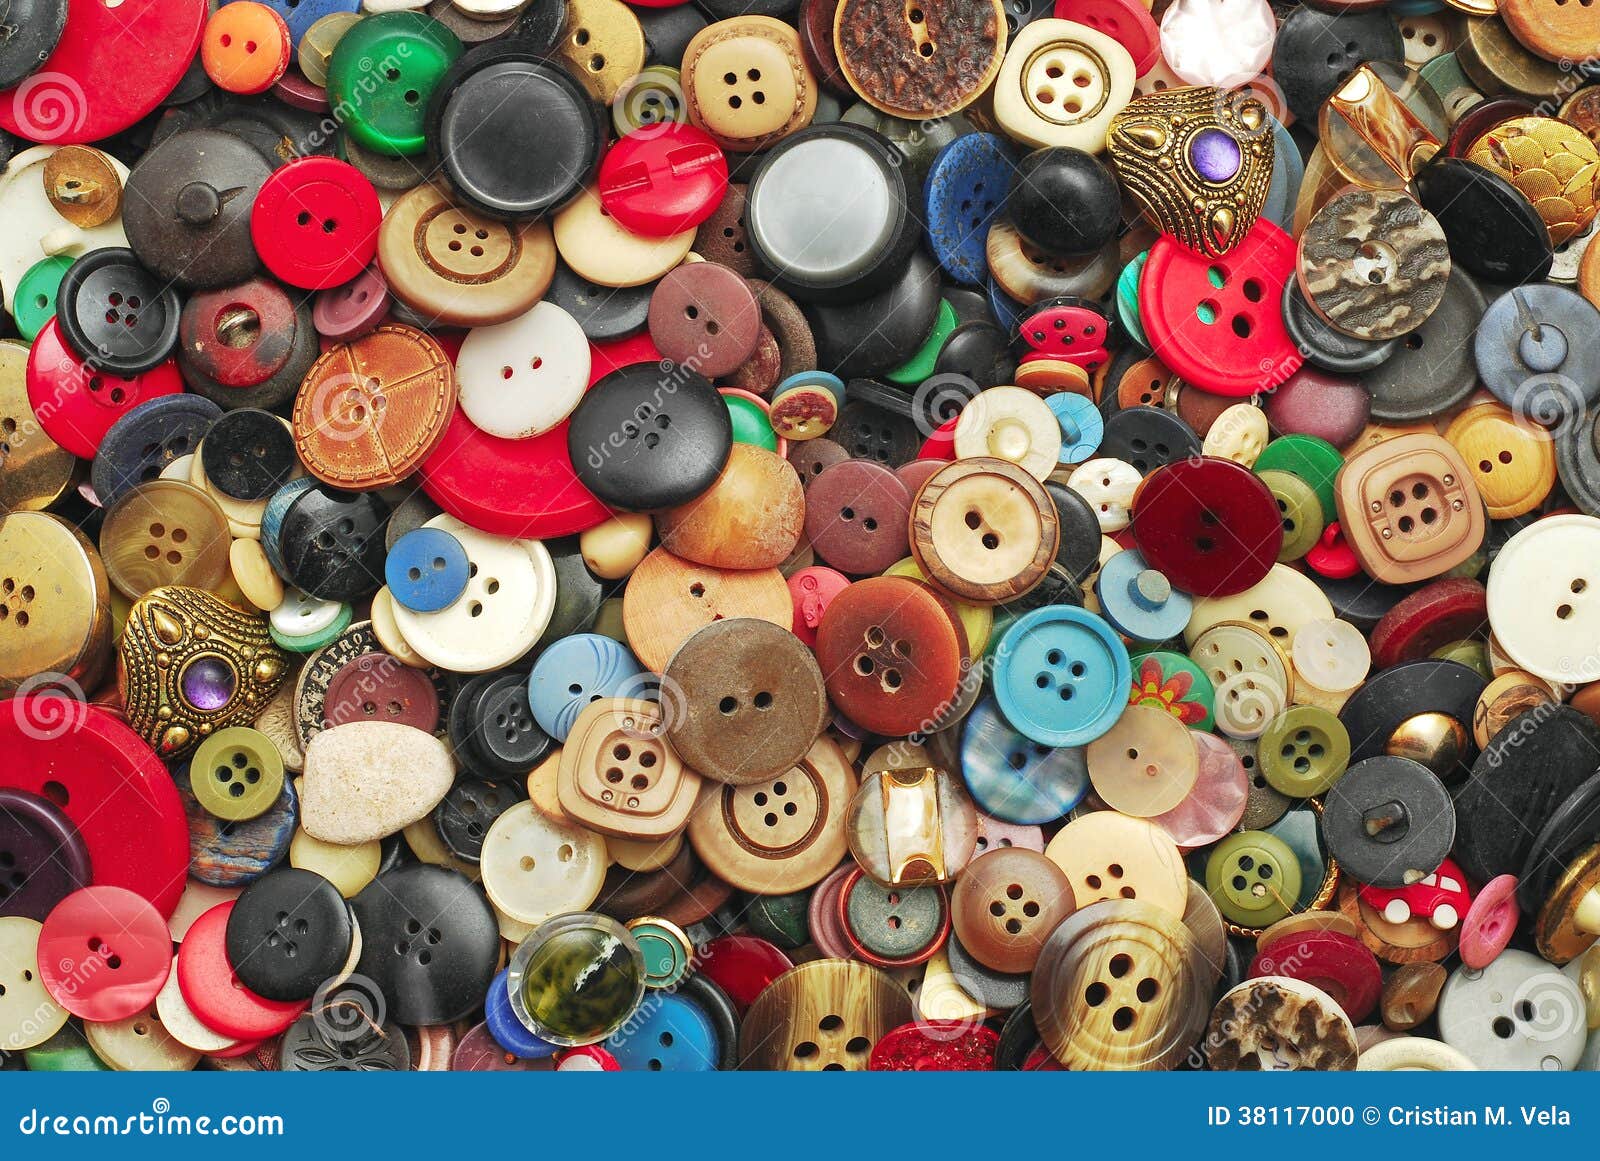 Collecting Vintage Buttons 68